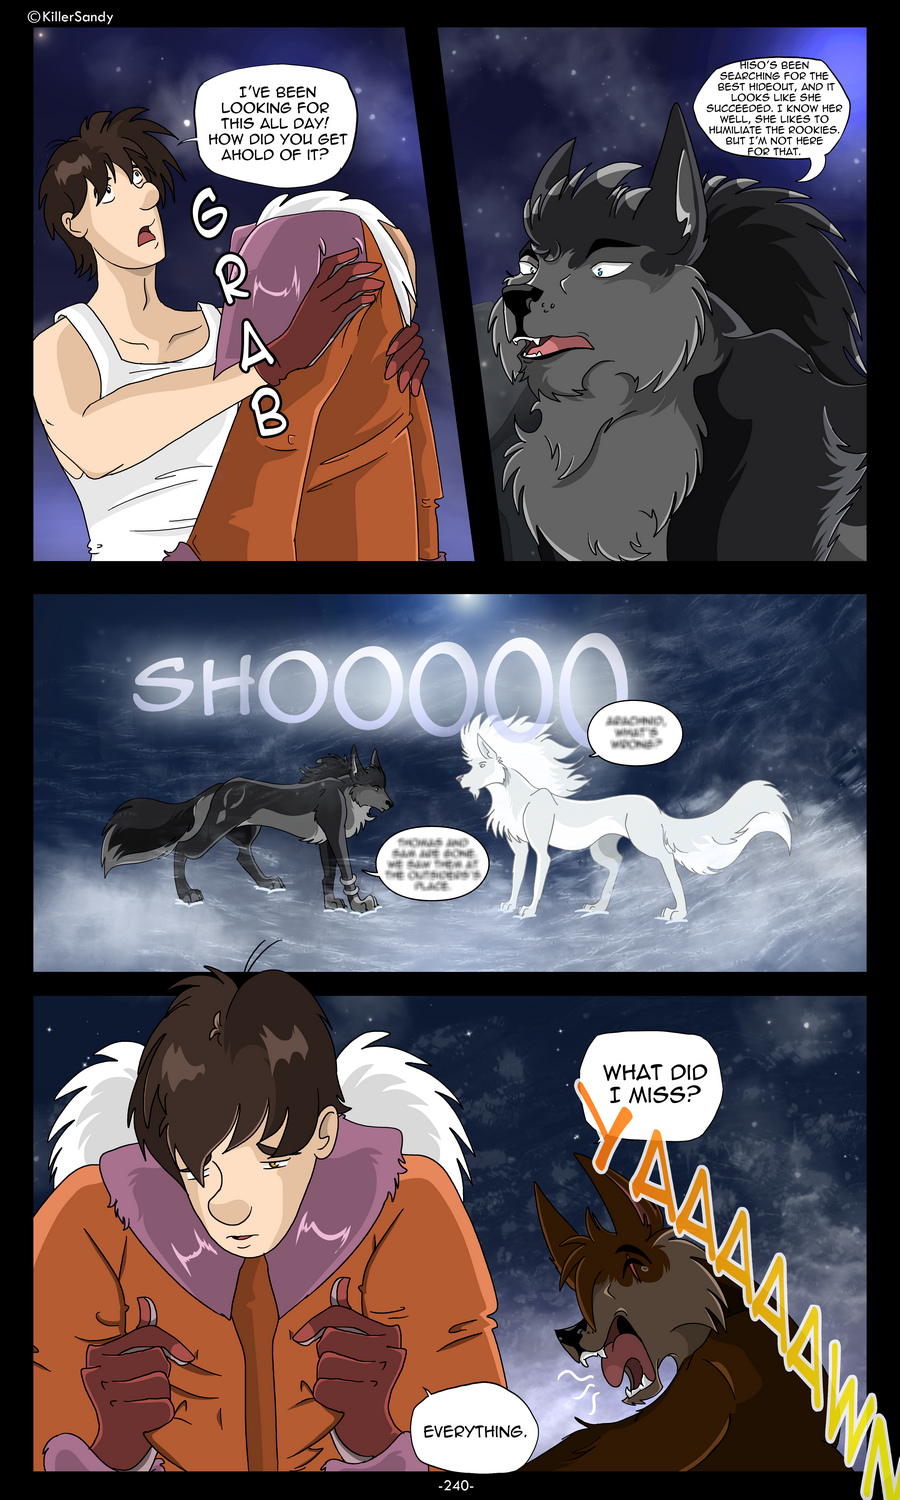 The Prince of the Moonlight Stone page 240